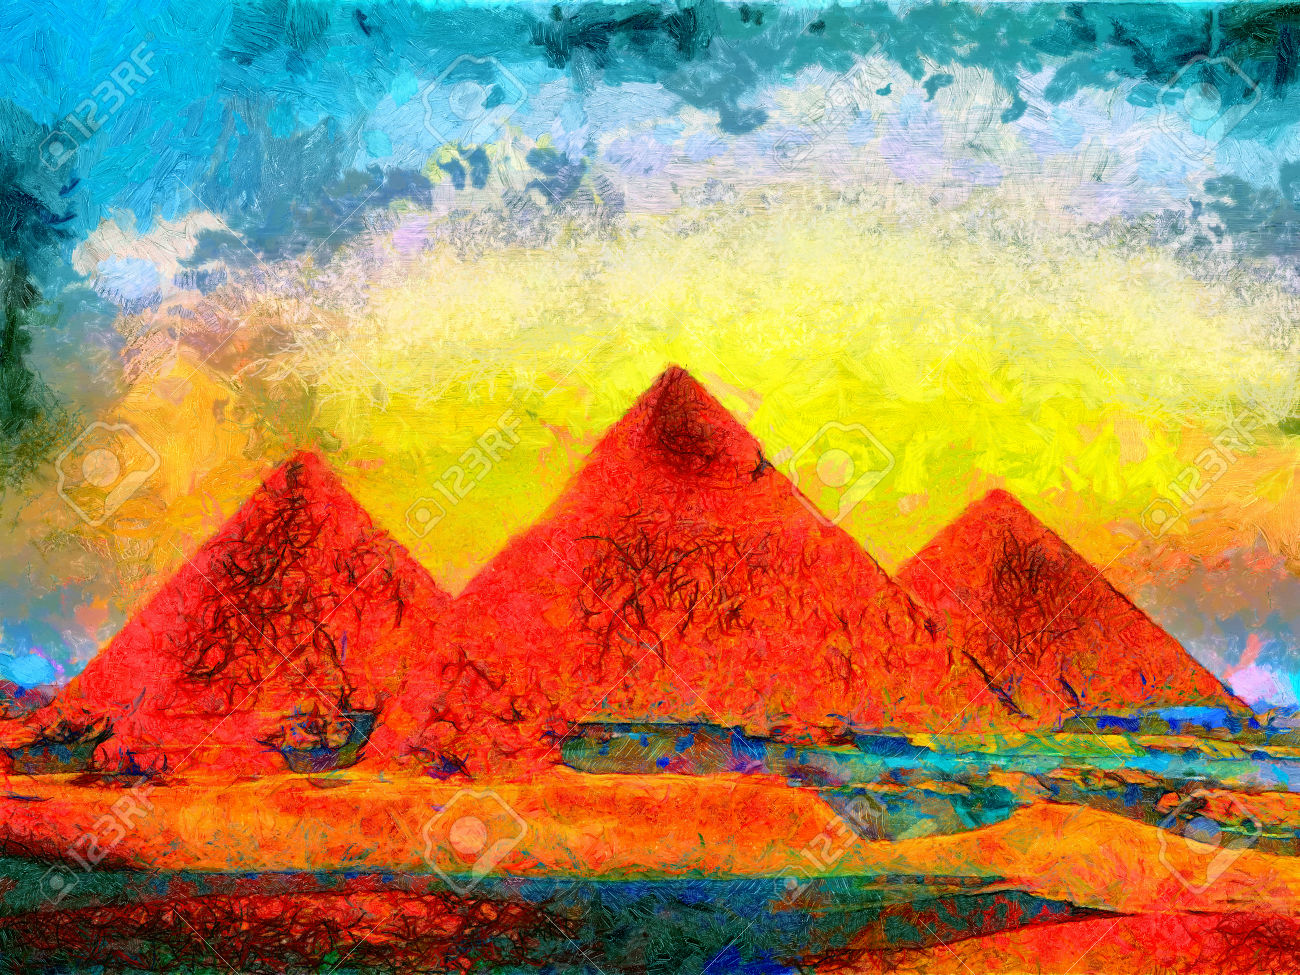 Giza Pyramids colorful oil painting